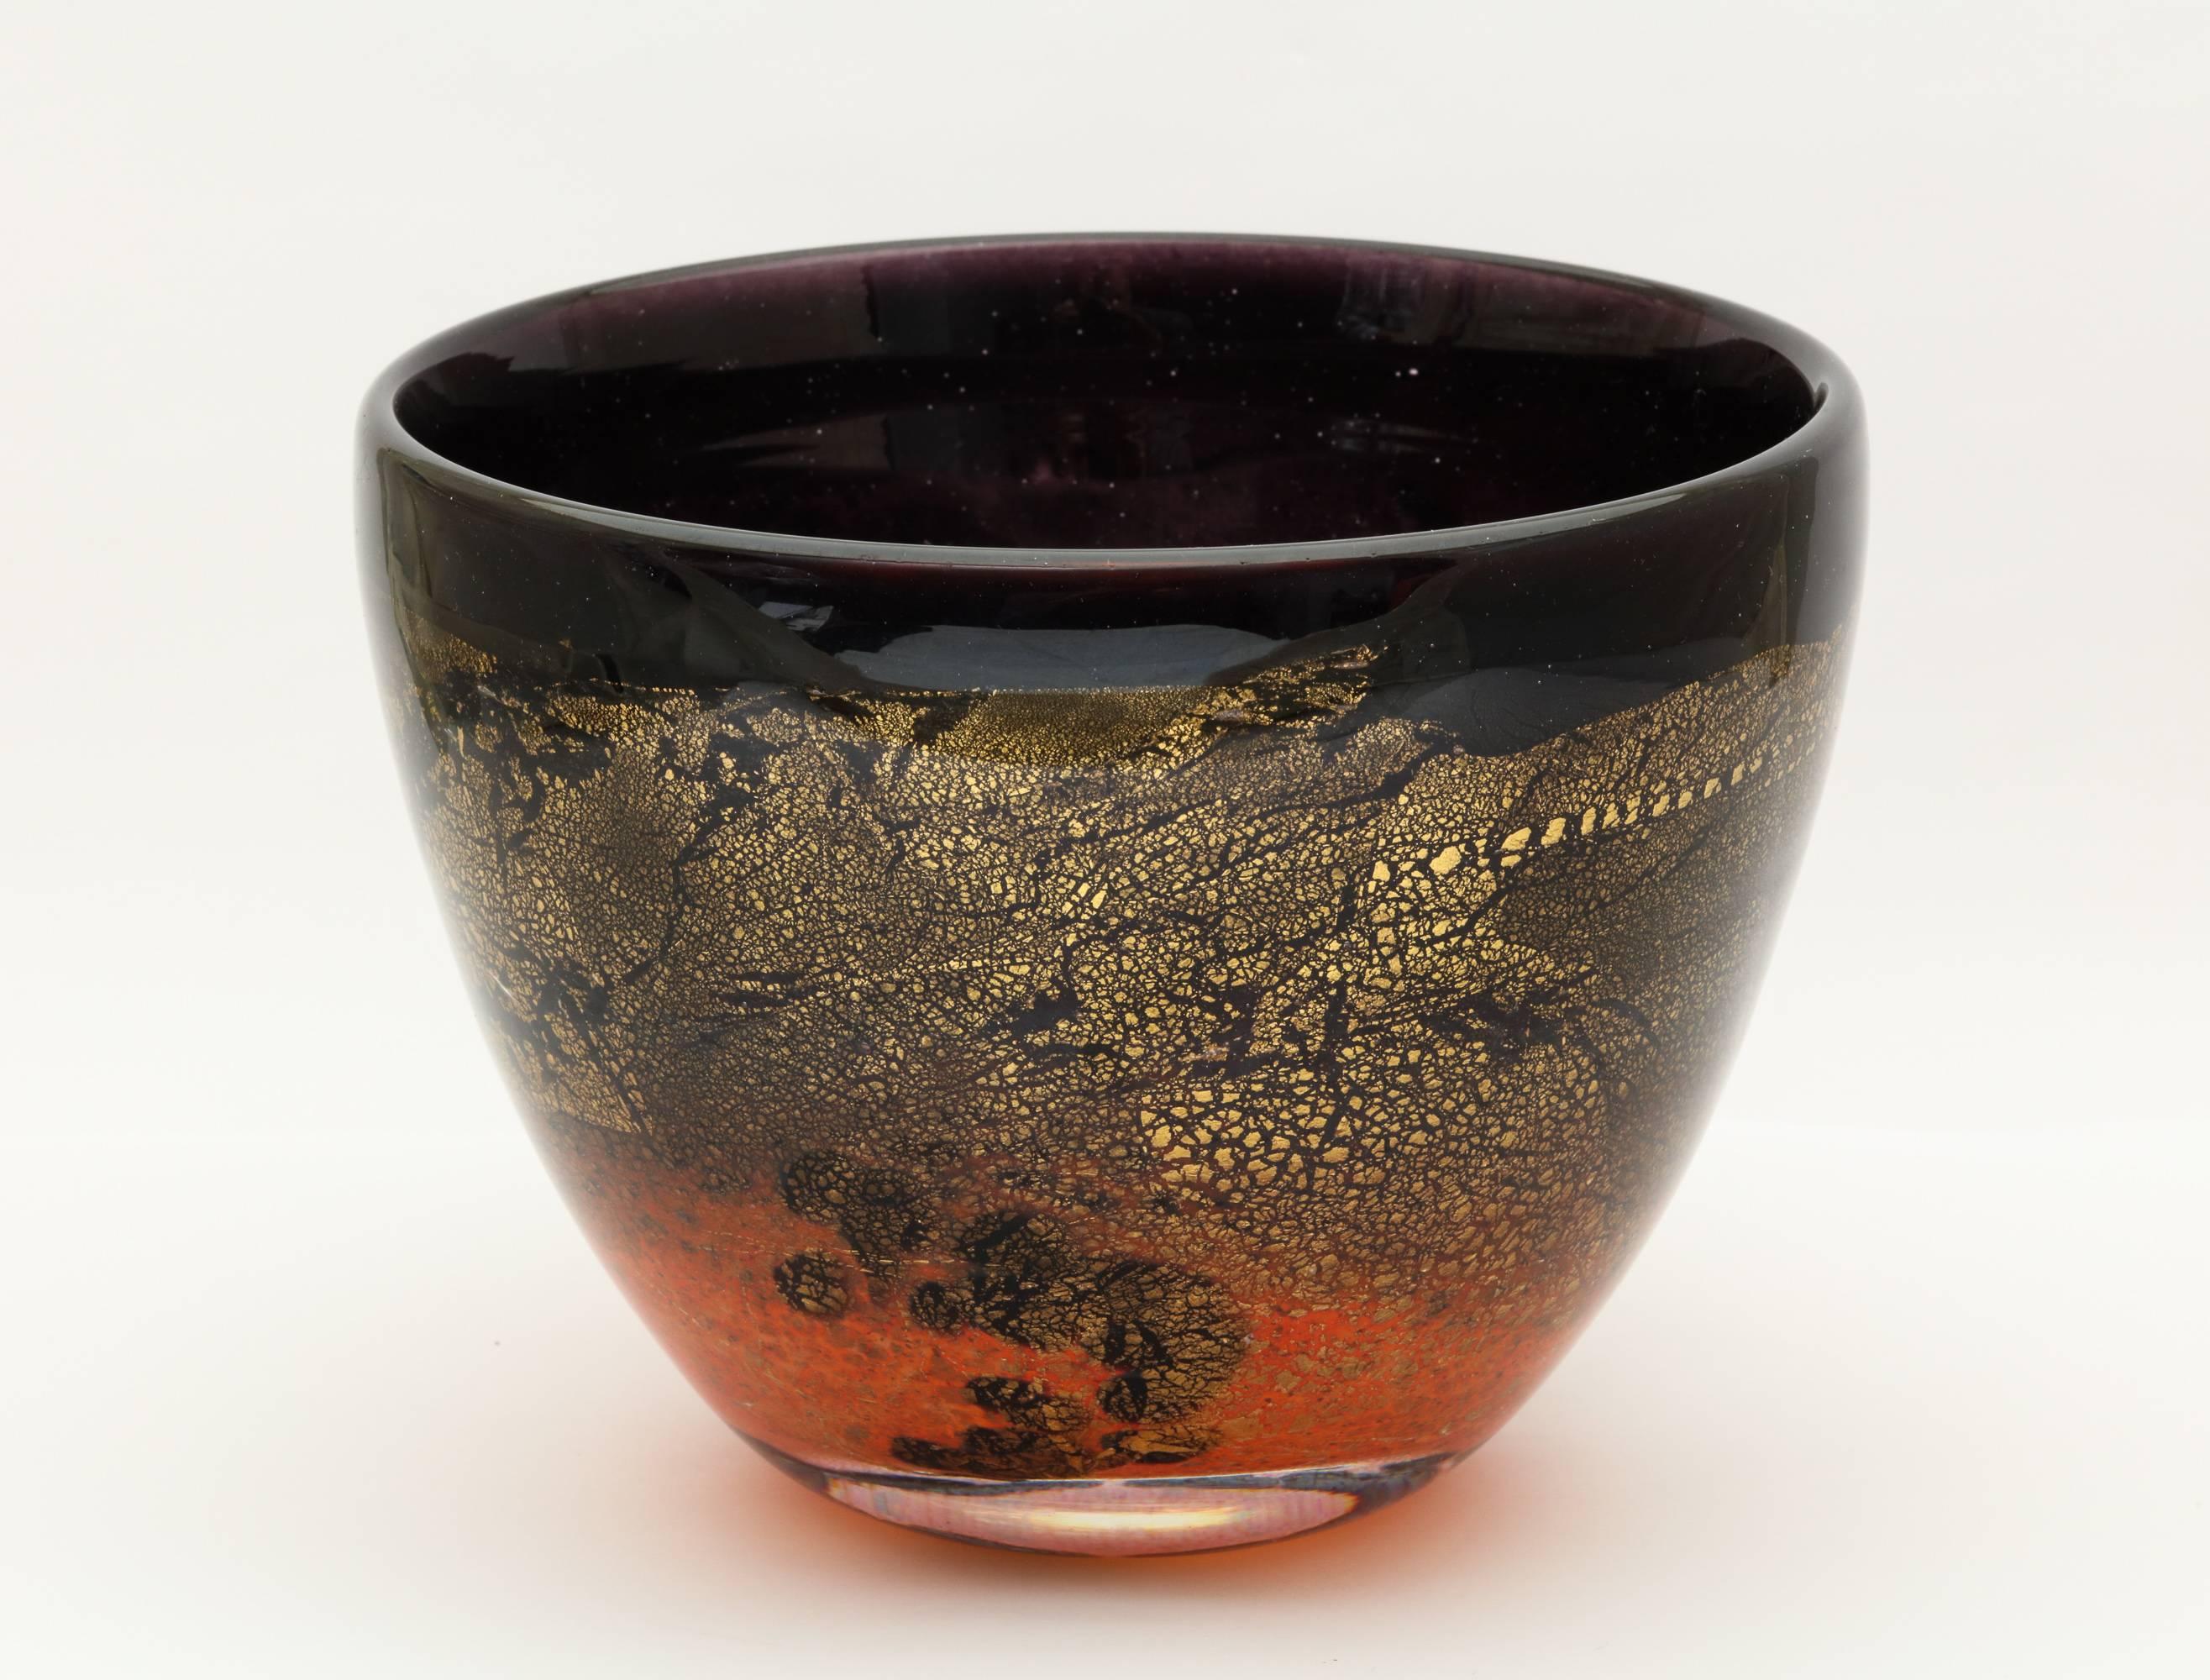 Organic Modern Volcanic Red and Black Terre Des Arts Handblown Glass Bowl For Sale